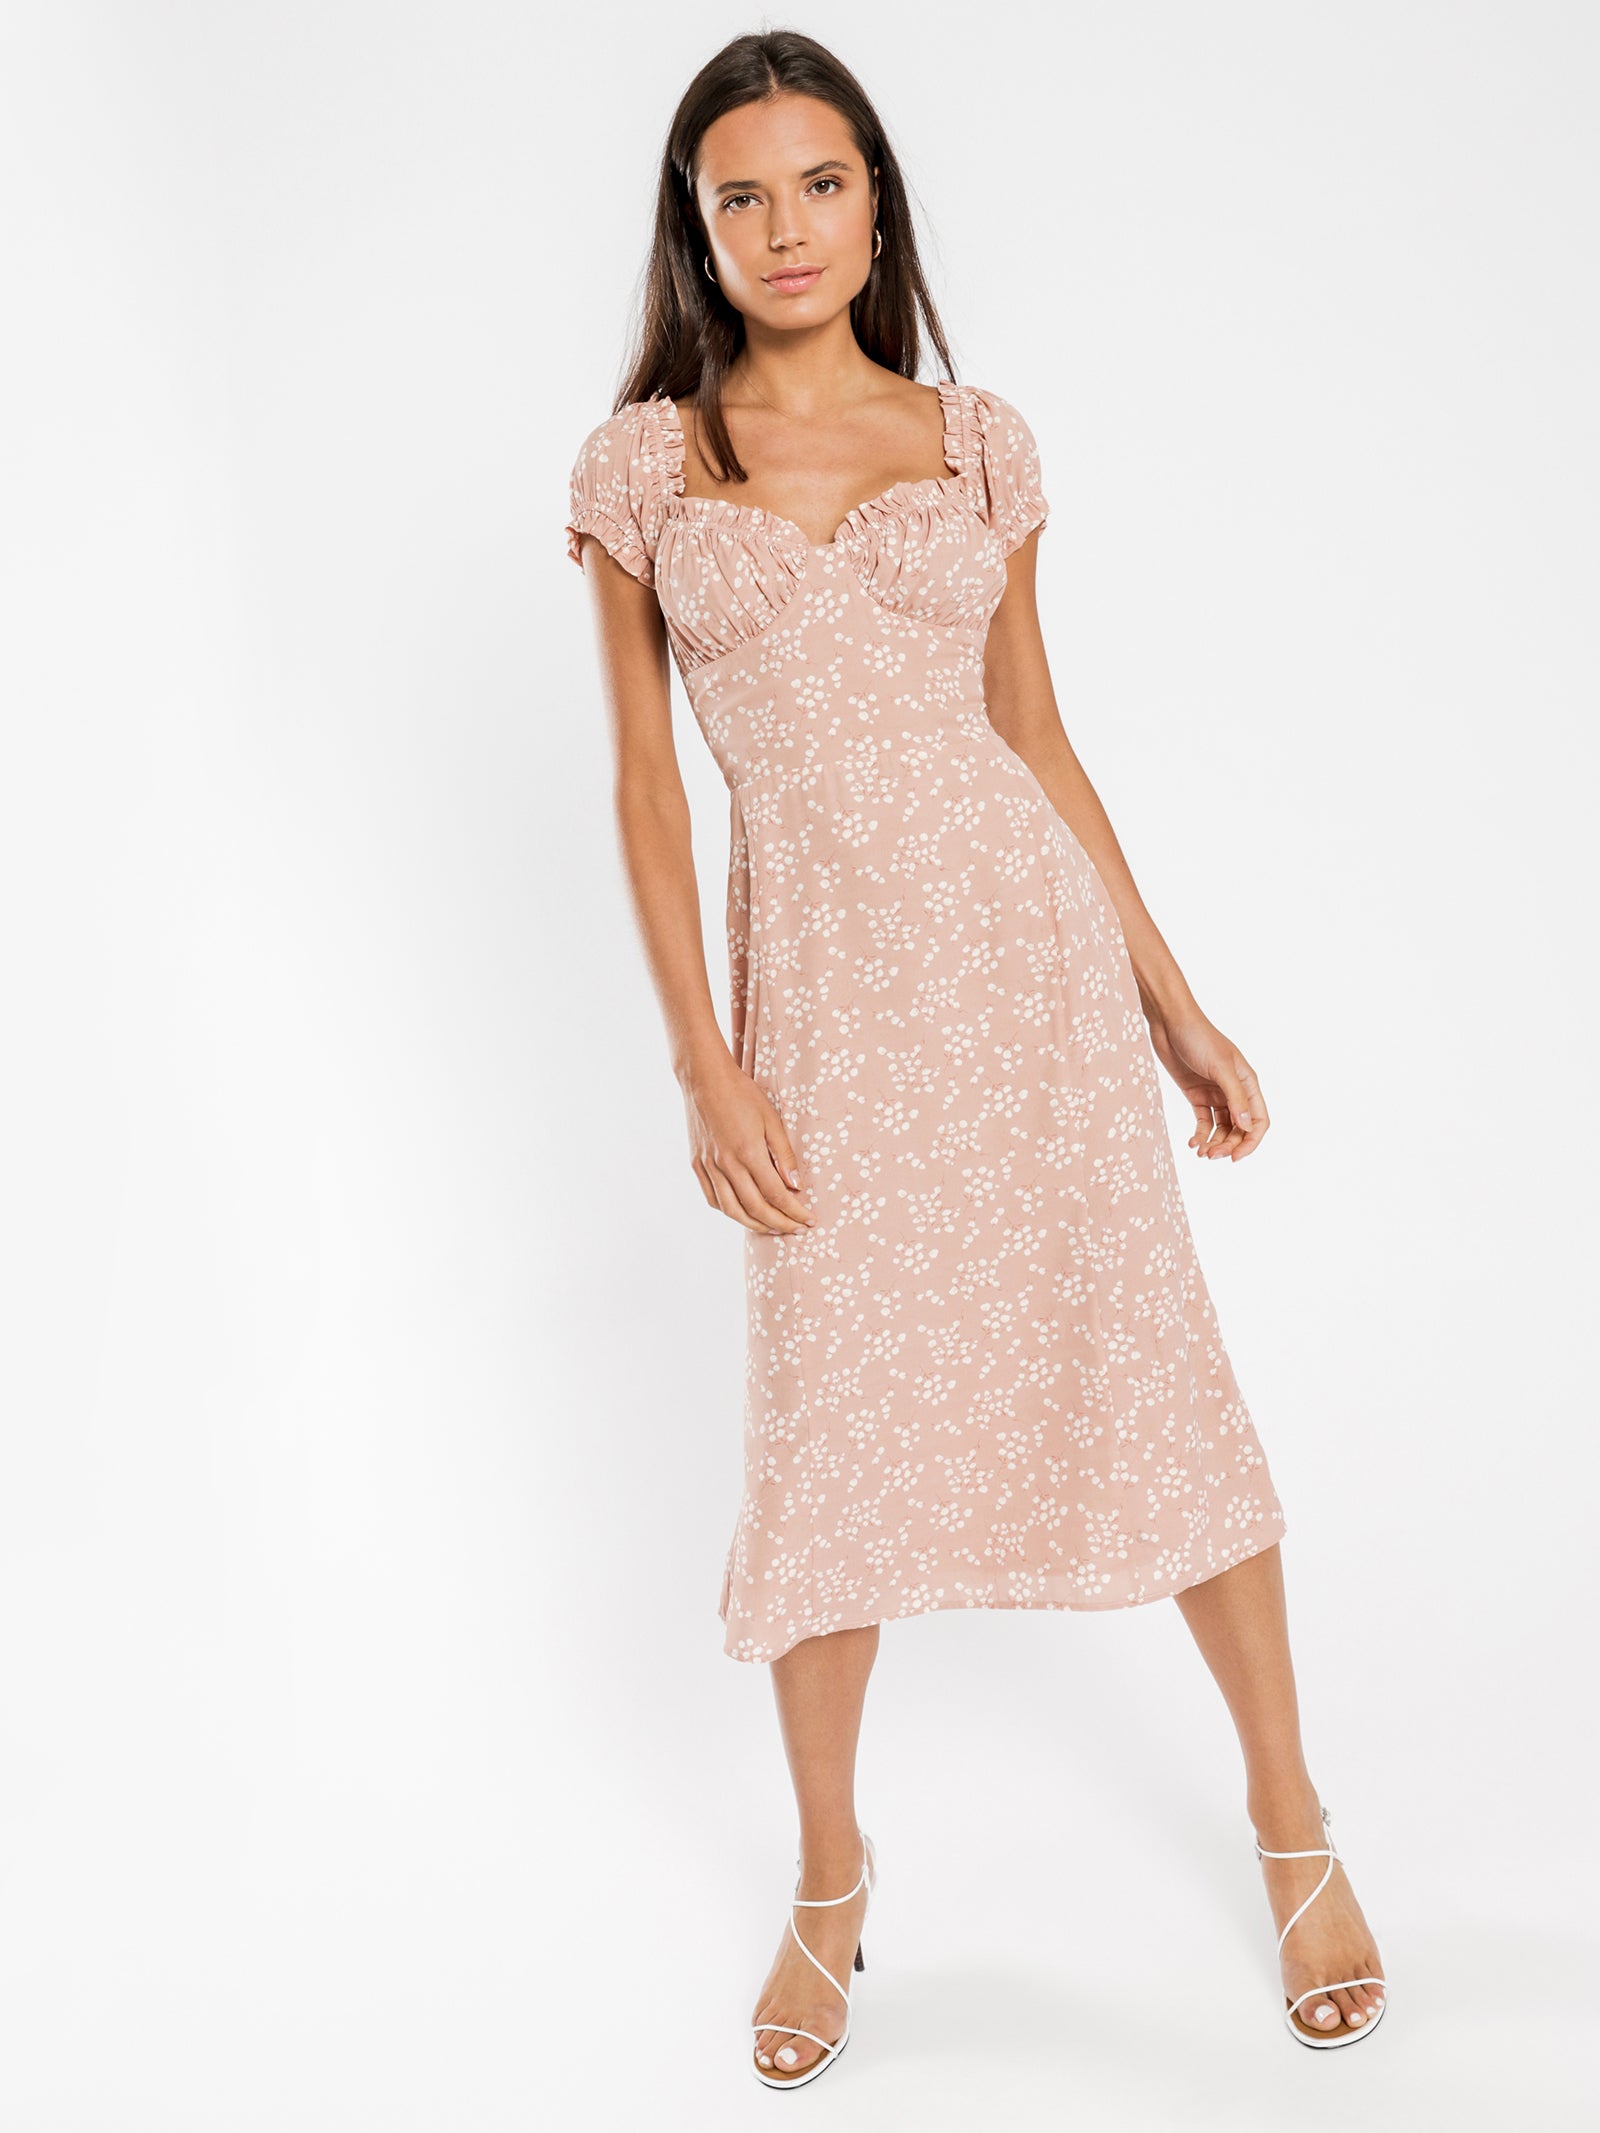 Cosette Midi Dress in Pink Floral